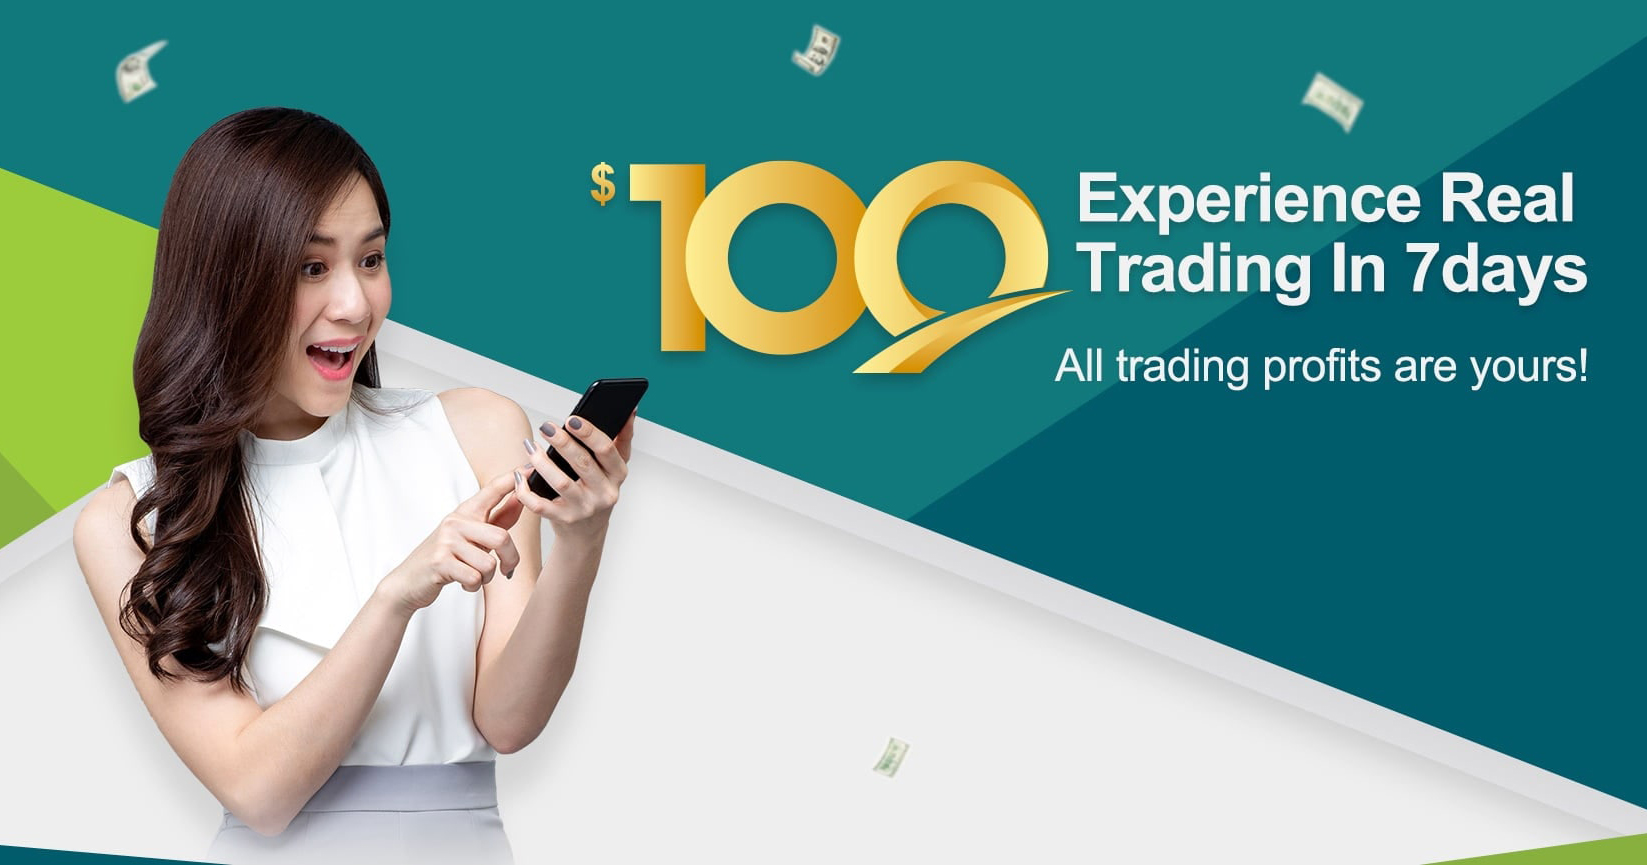 $100 Free Trading Funds - HXFX Global$100 Free Trading Funds - HXFX Global